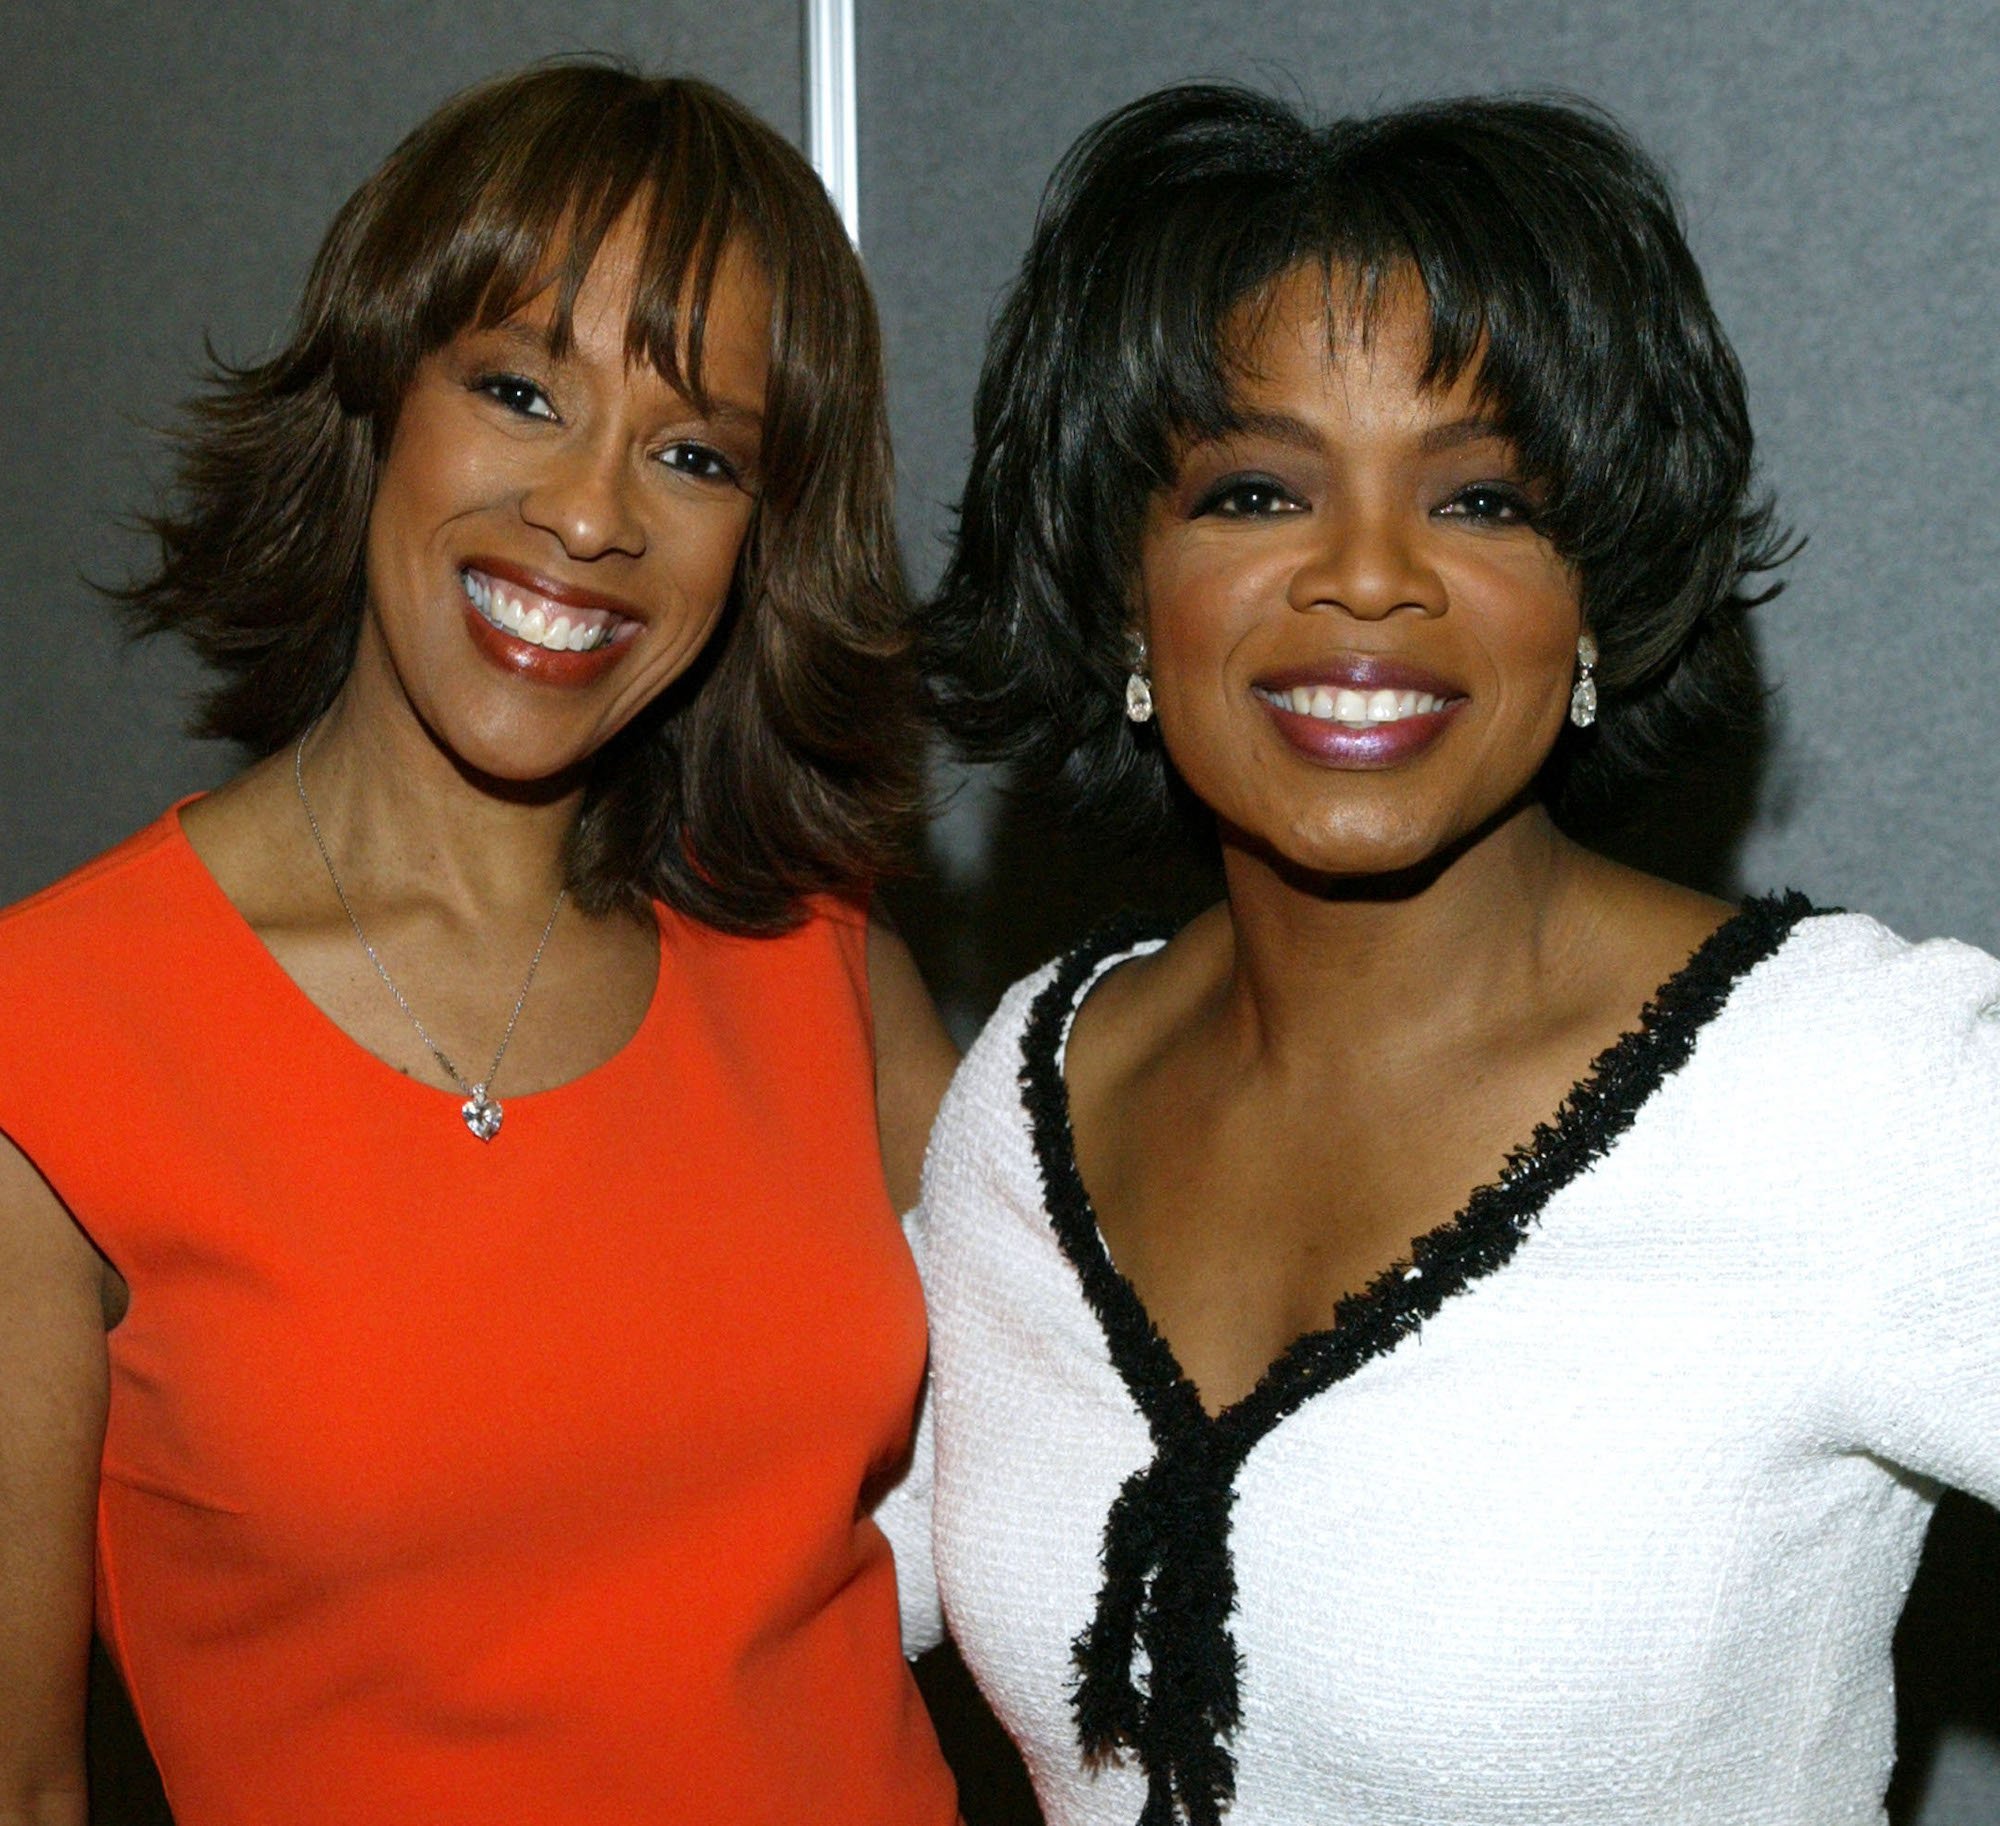 Gayle King and Oprah Winfrey attending the 2004 Distinguished Service Awards